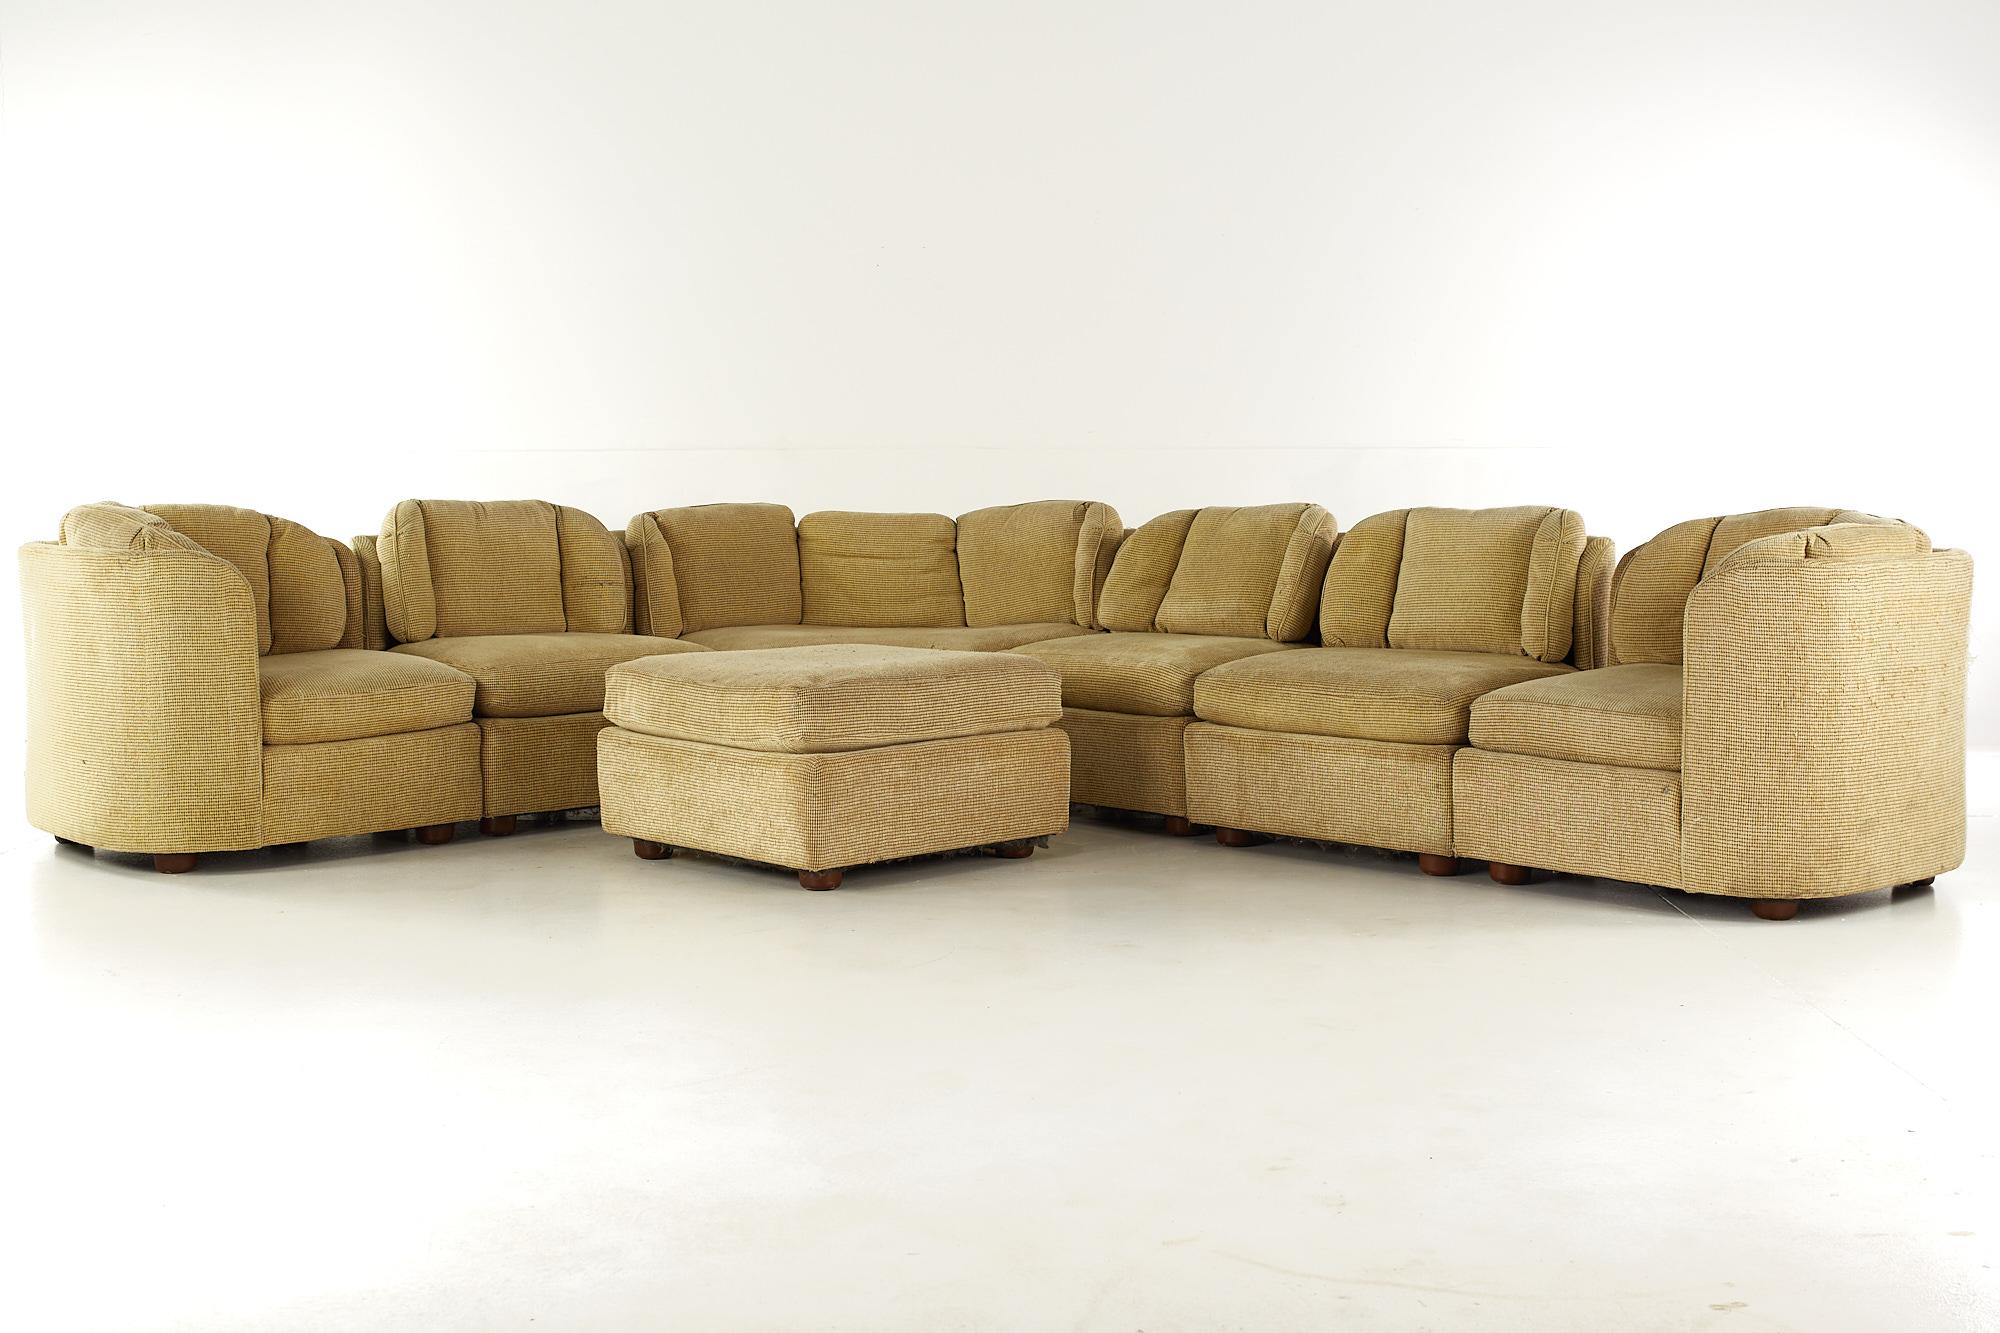 Henredon Mid Century Folio 500 7 Piece Modular Scallop Back Sectional Sofa

This sectional sofa measures: 142 wide x 110 deep x 29.5 inches high, with a seat height of 16 and arm height of 28 inches

All pieces of furniture can be had in what we